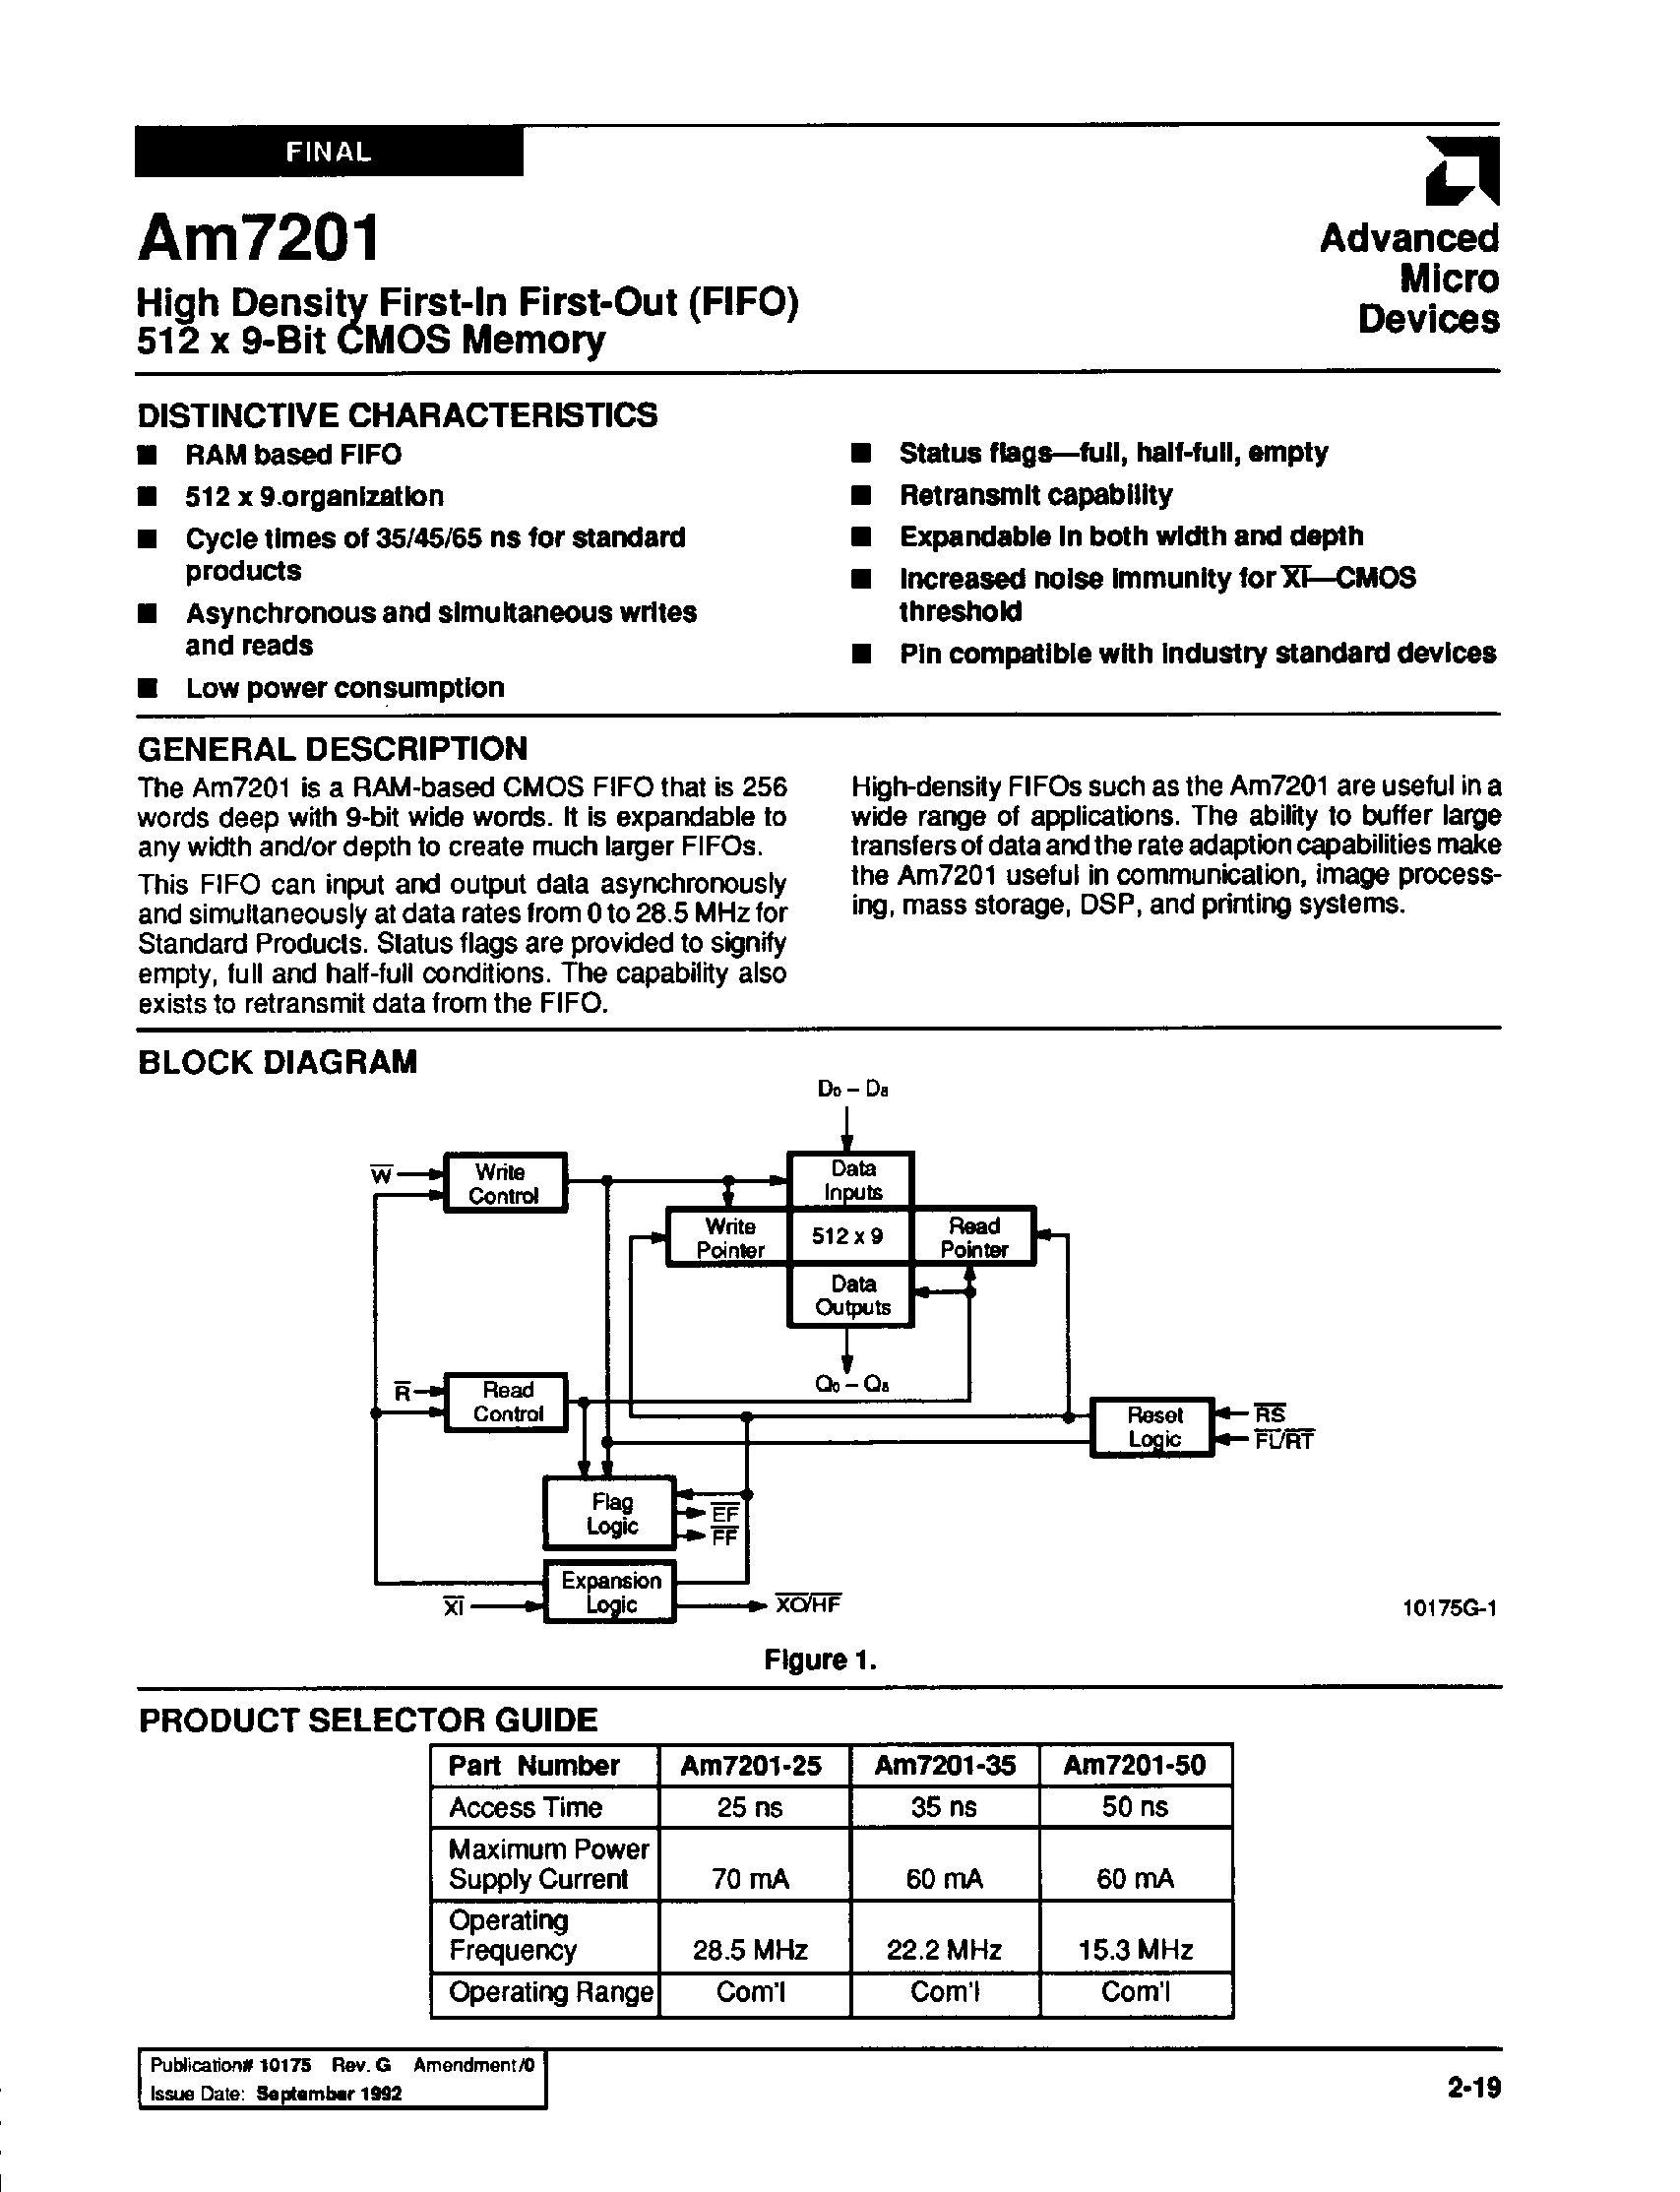 Datasheet AM7201 - HIGH DENSITY FIRST-IN FIRST-OUT(FIFO) 512 x 9-BIT CMOS MEMORY page 1